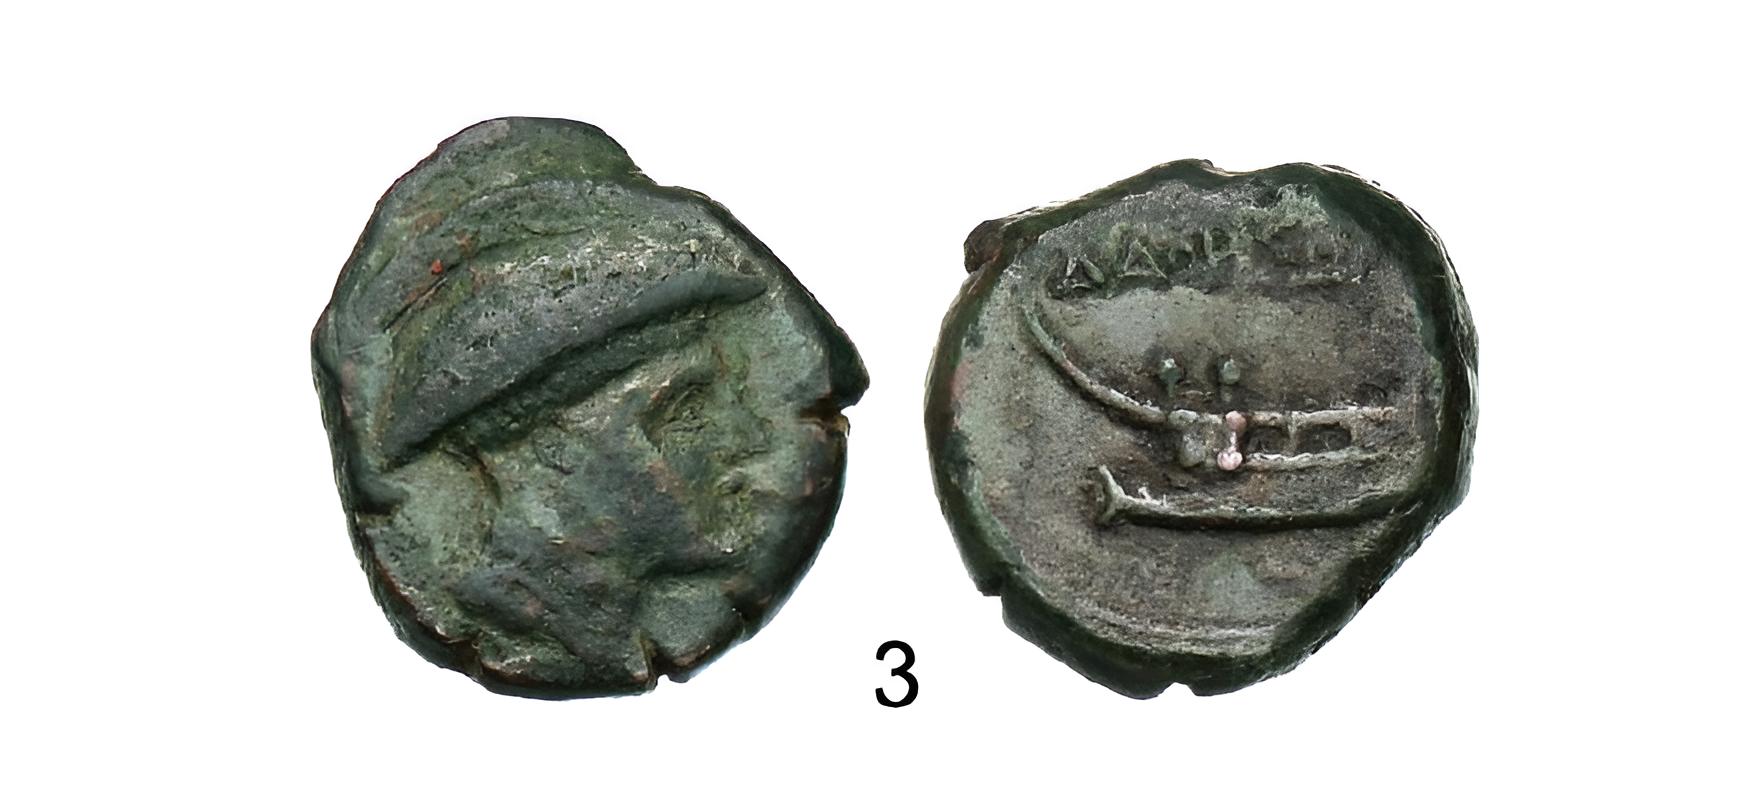 Coins minted by the inhabitants of Daorson